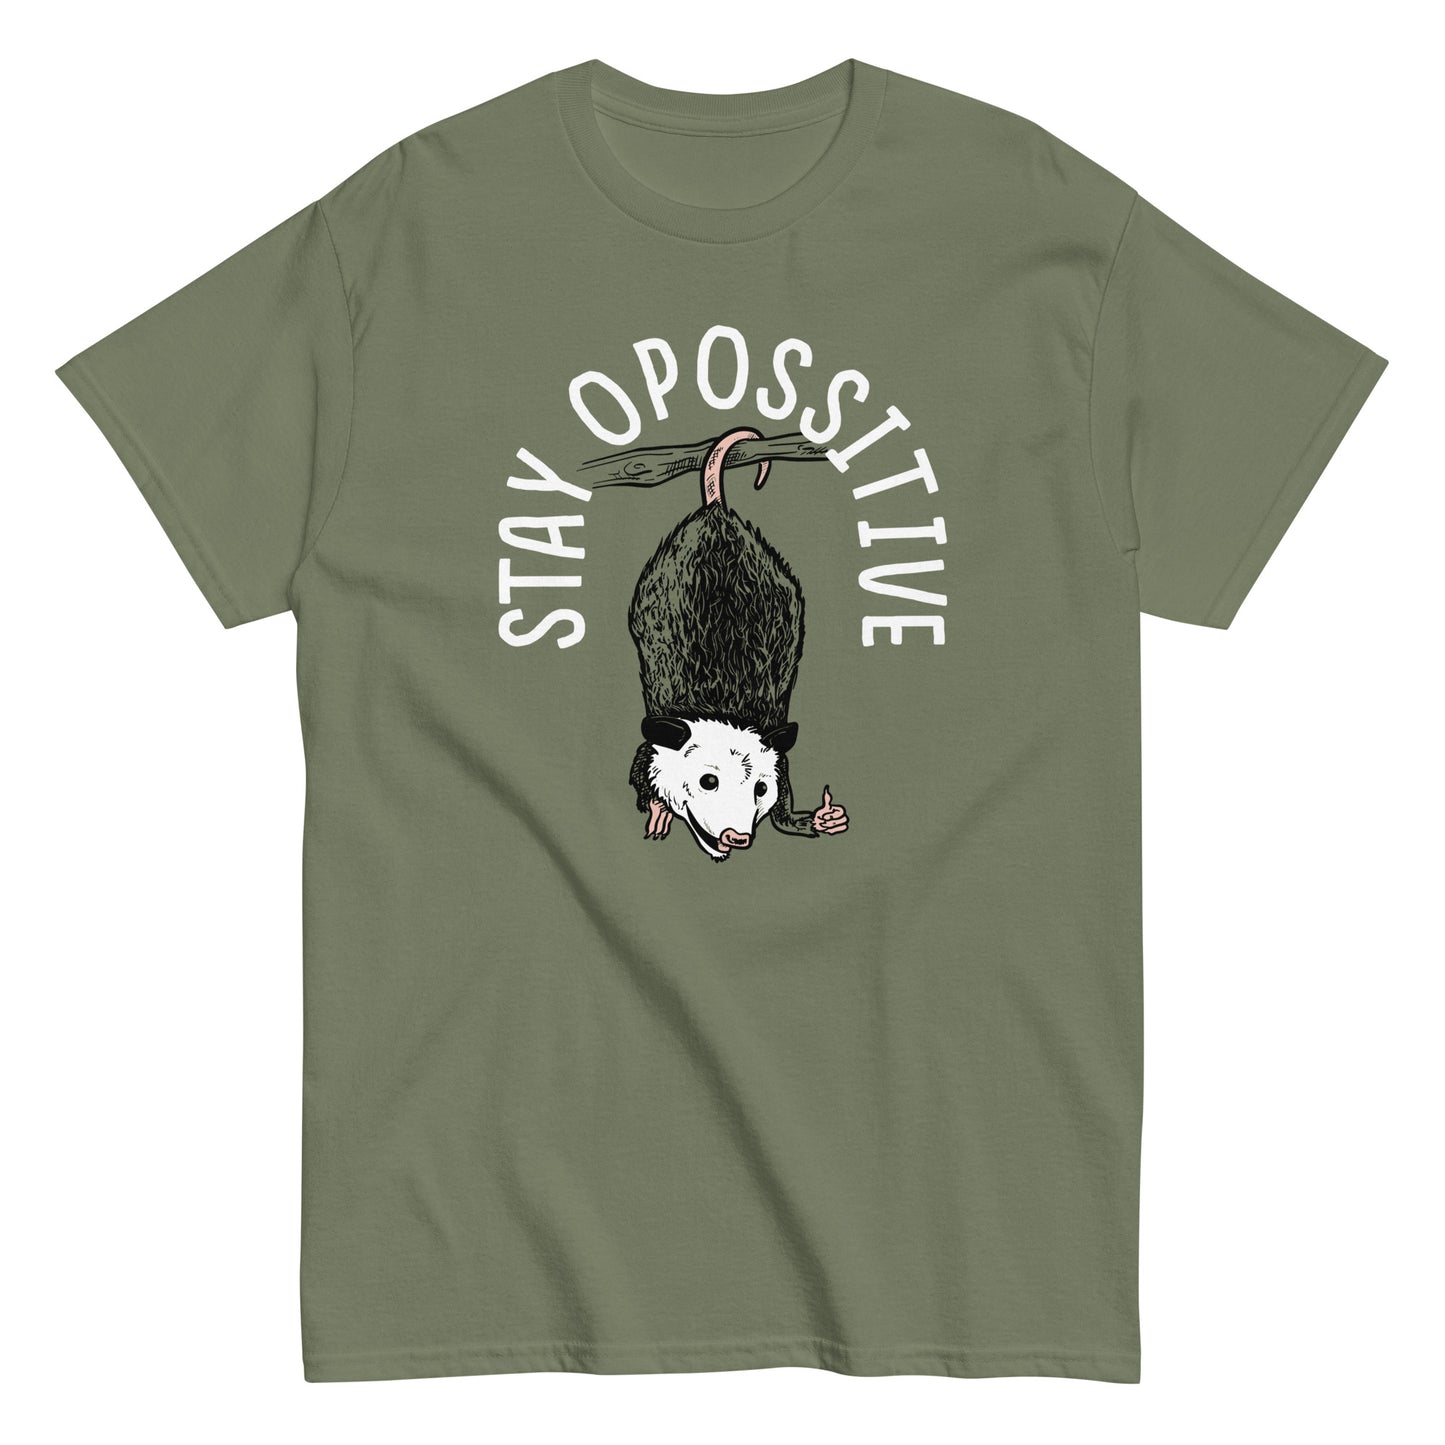 Stay Opossitive Men's Classic Tee